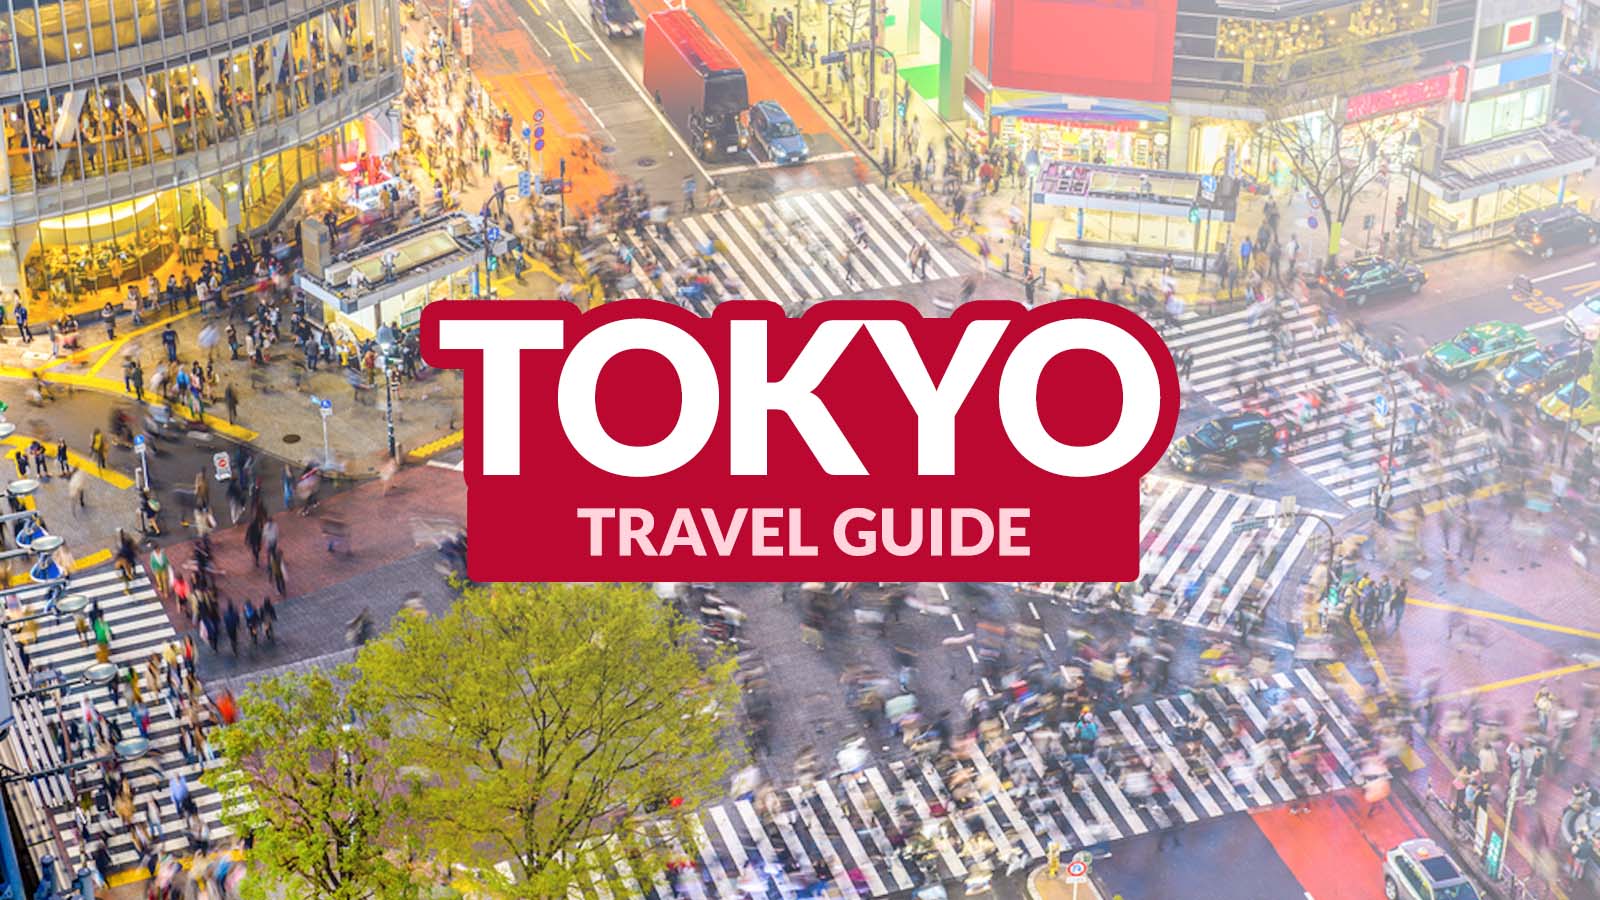 TOKYO TRAVEL GUIDE Japan Travel Now